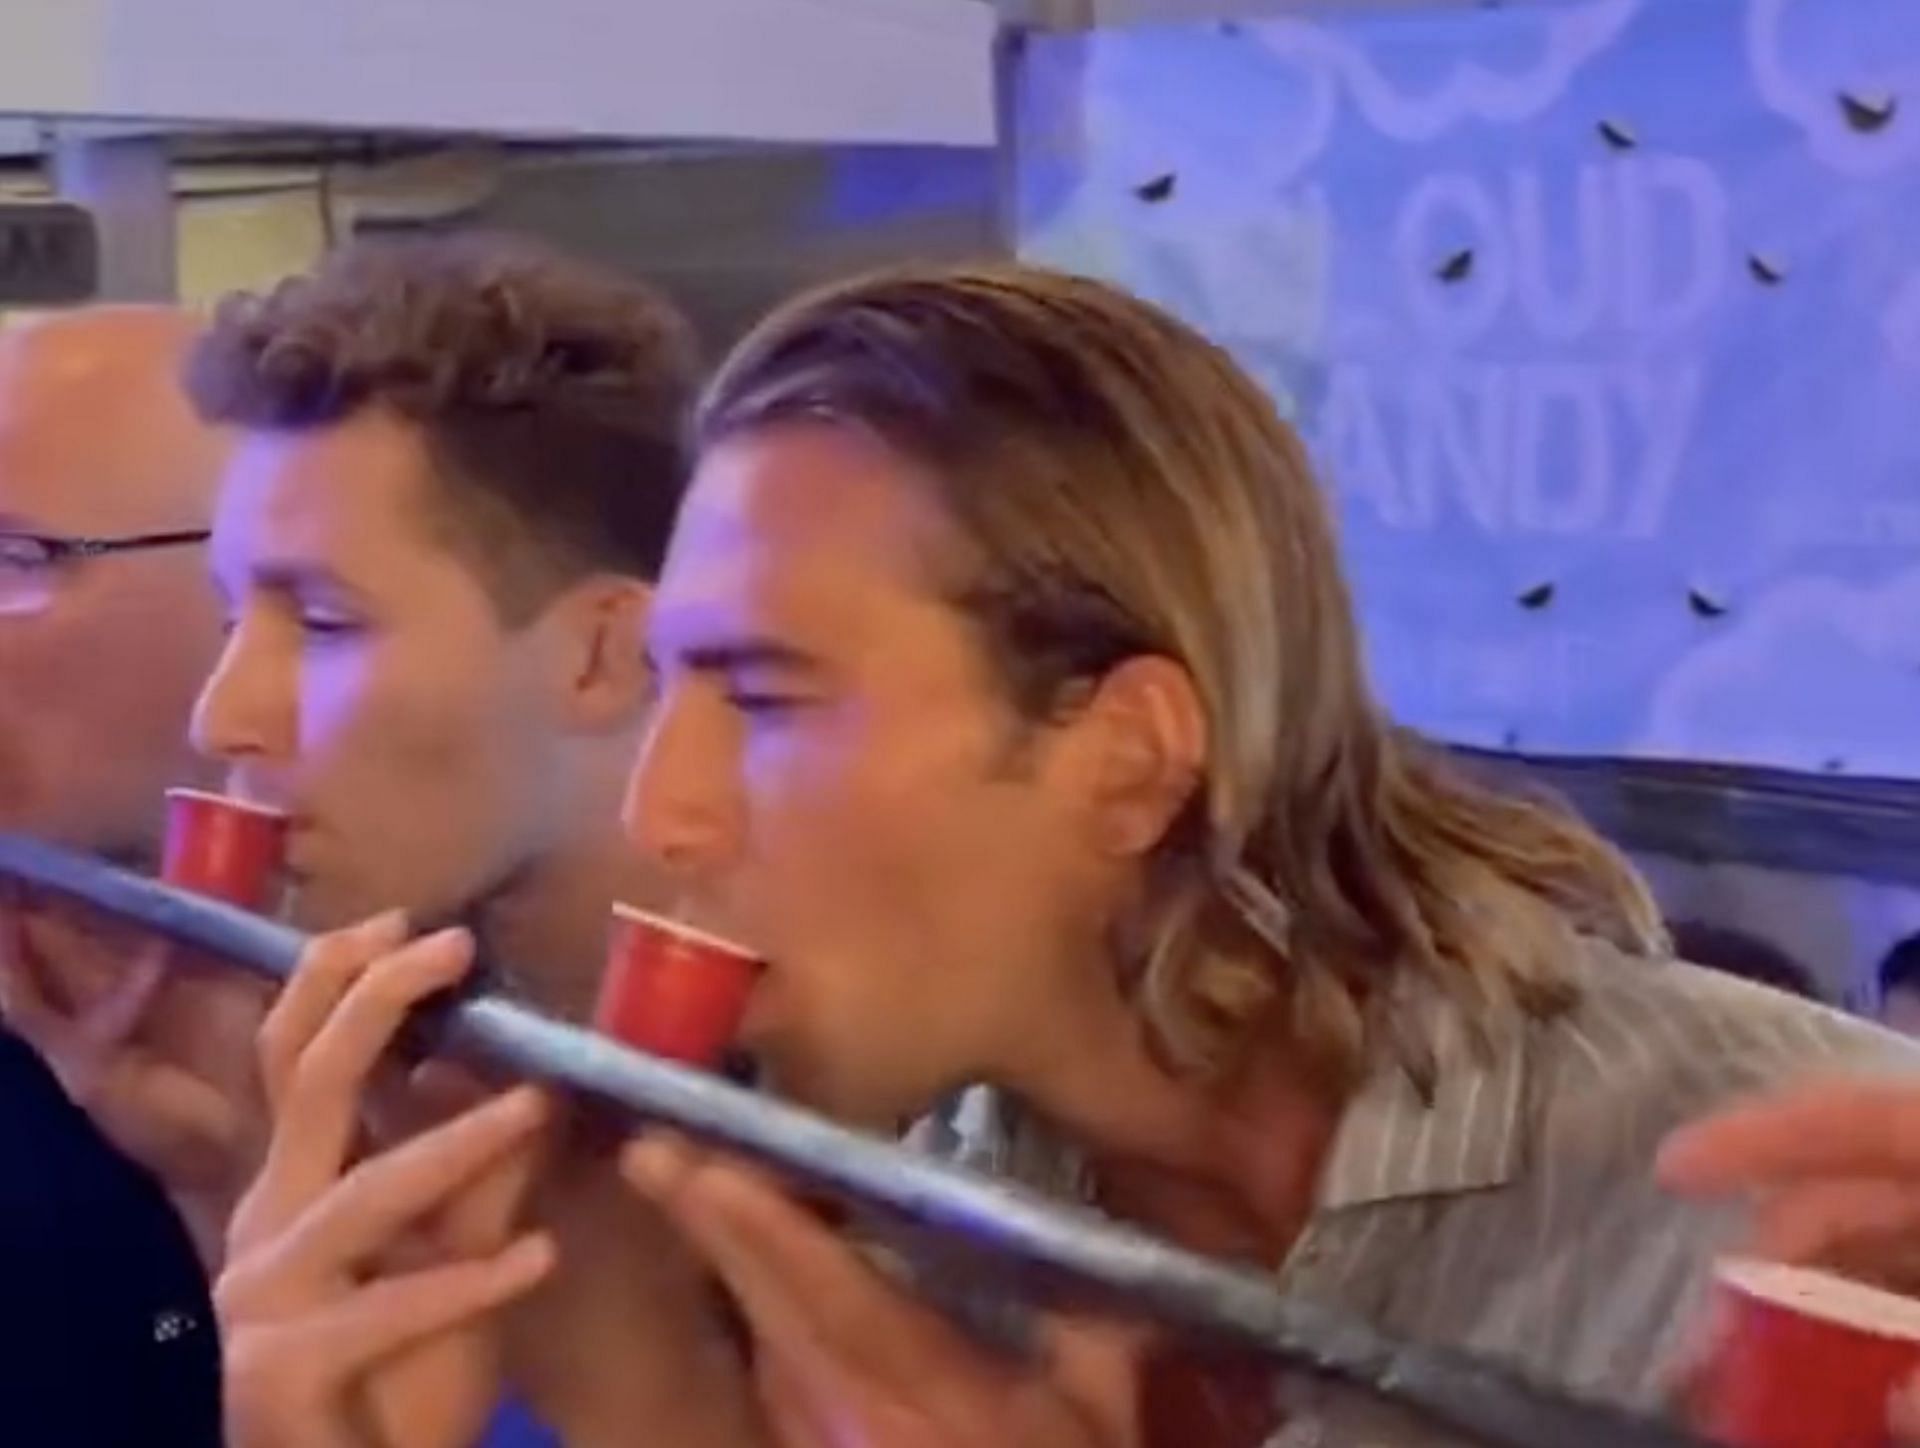 Matthew Tkachuk and other NHL stars spotted partying hard with shot skis